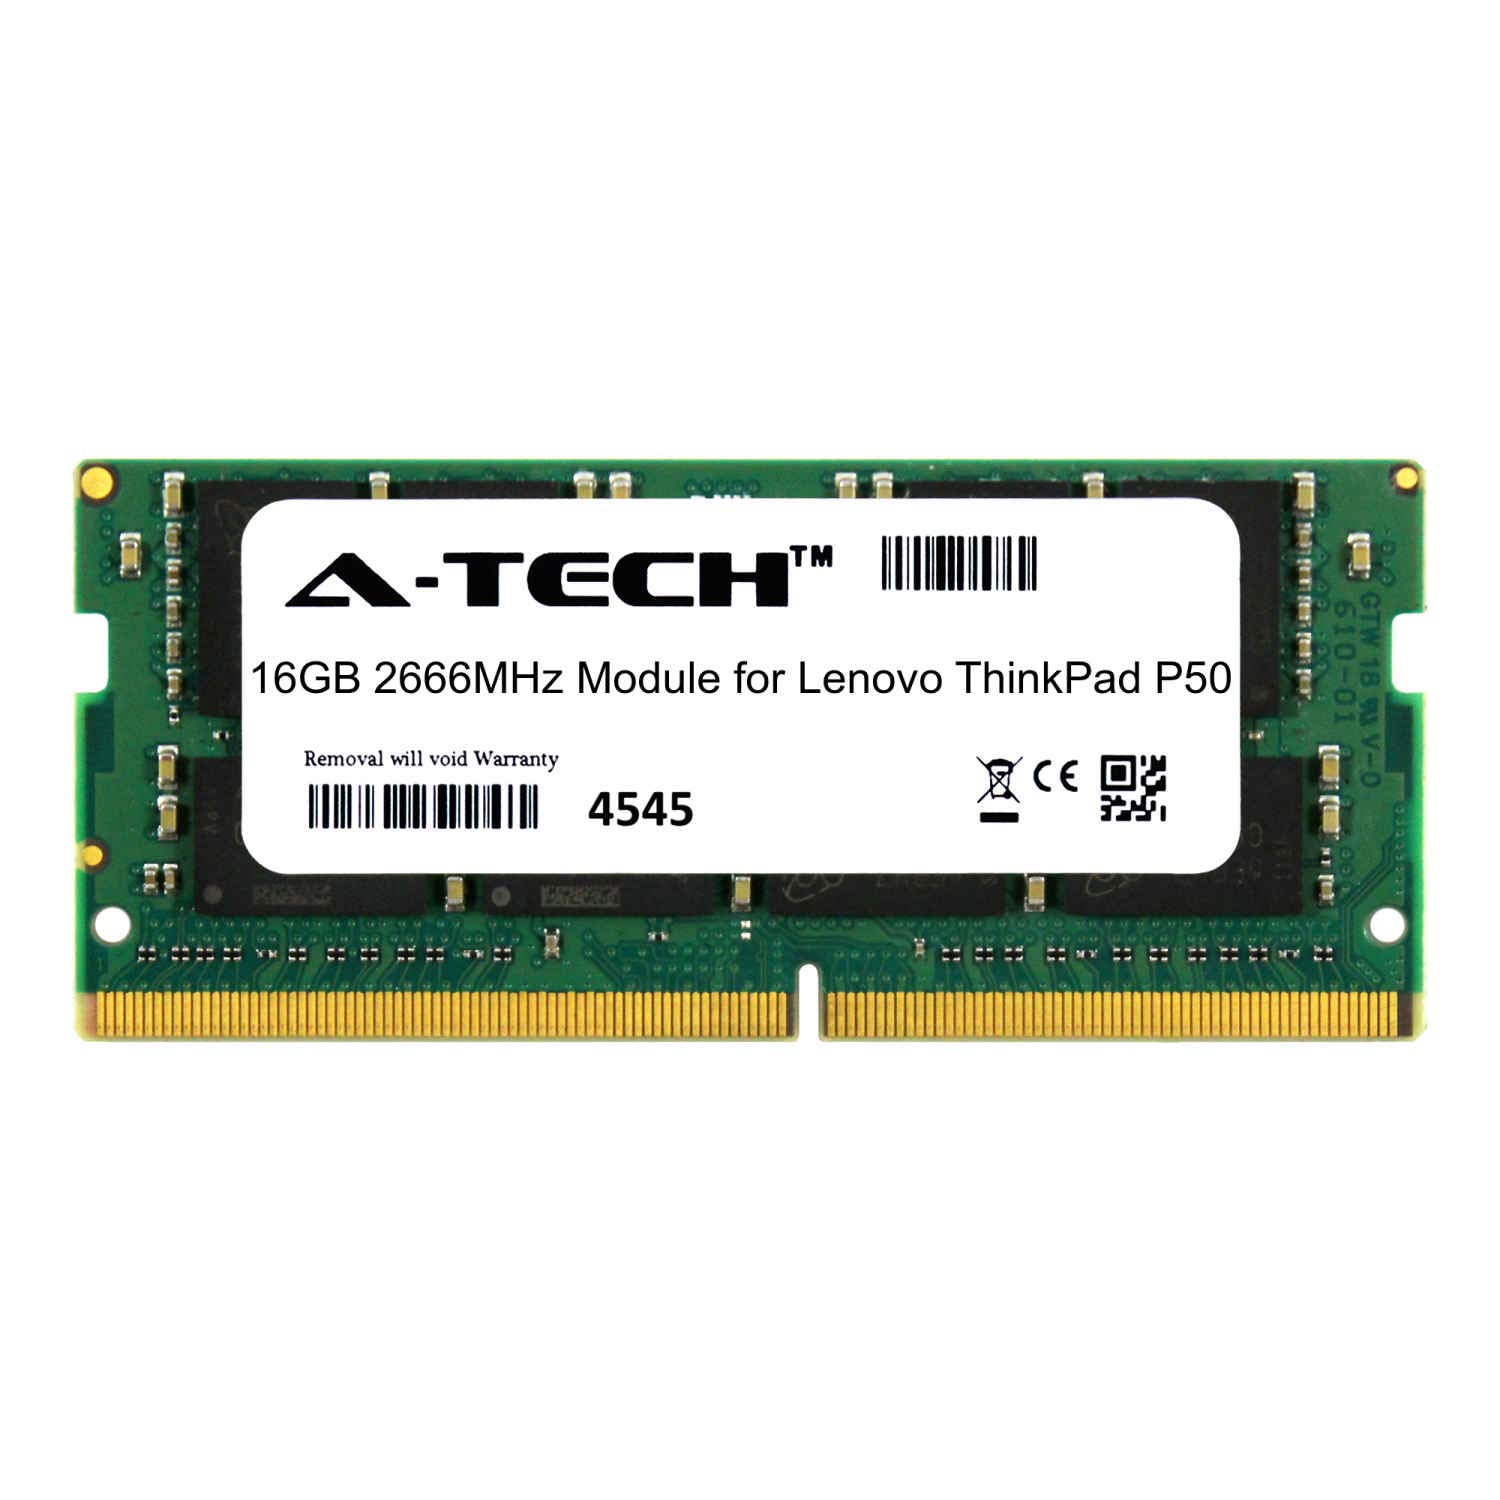 A-Tech 16GB Module for Lenovo ThinkPad P50 Laptop & Notebook Compatible DDR4 2666Mhz Memory Ram (ATMS350766A25832X1)